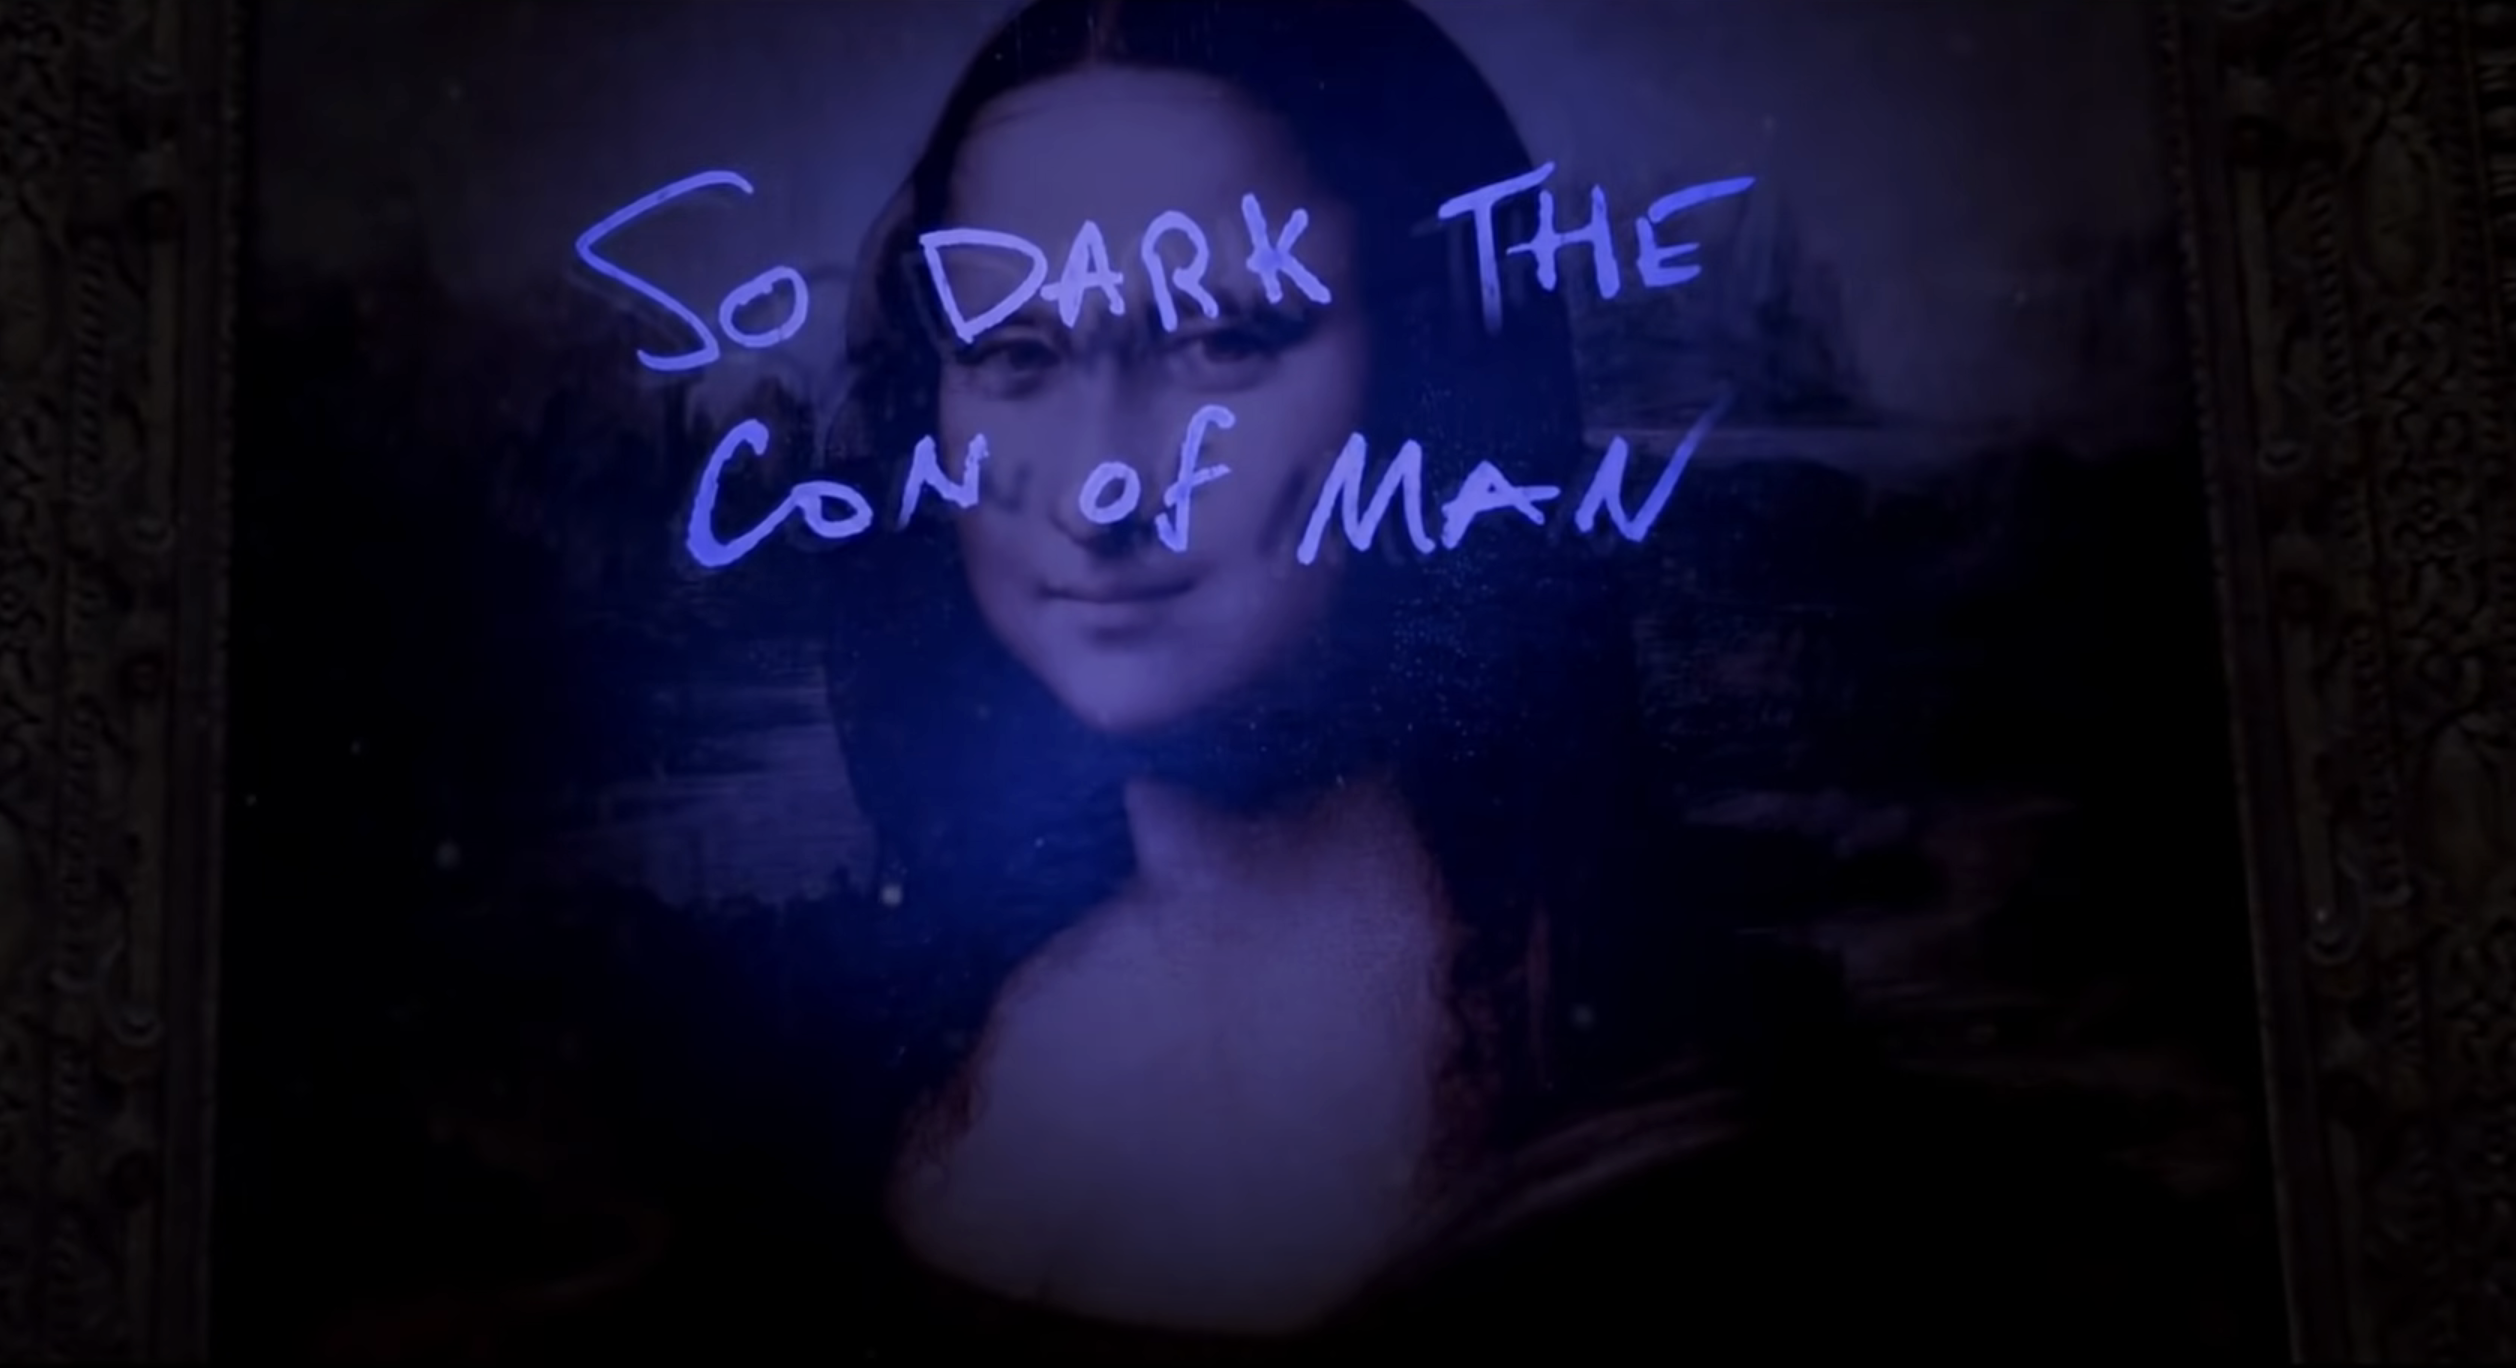 A painting of The Mona Lisa with &quot;So dark the con of man&quot; written on it